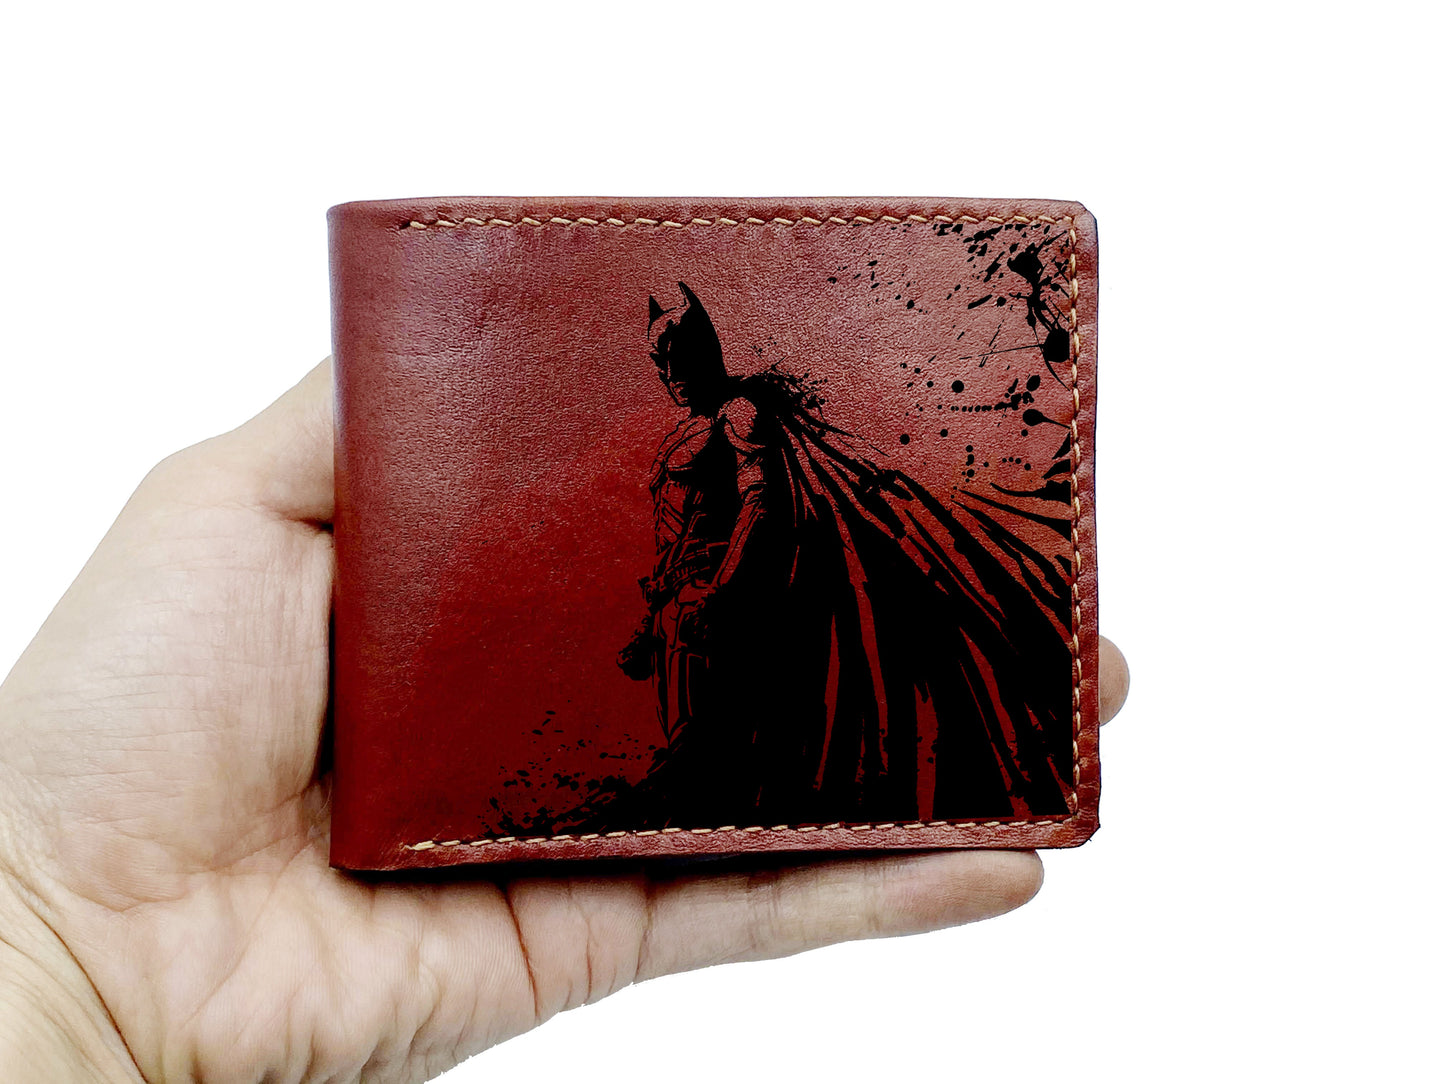 Mayan Corner - Custom batman leather wallet, engraving wallet with name initials, superheroes gift idea, special wedding present